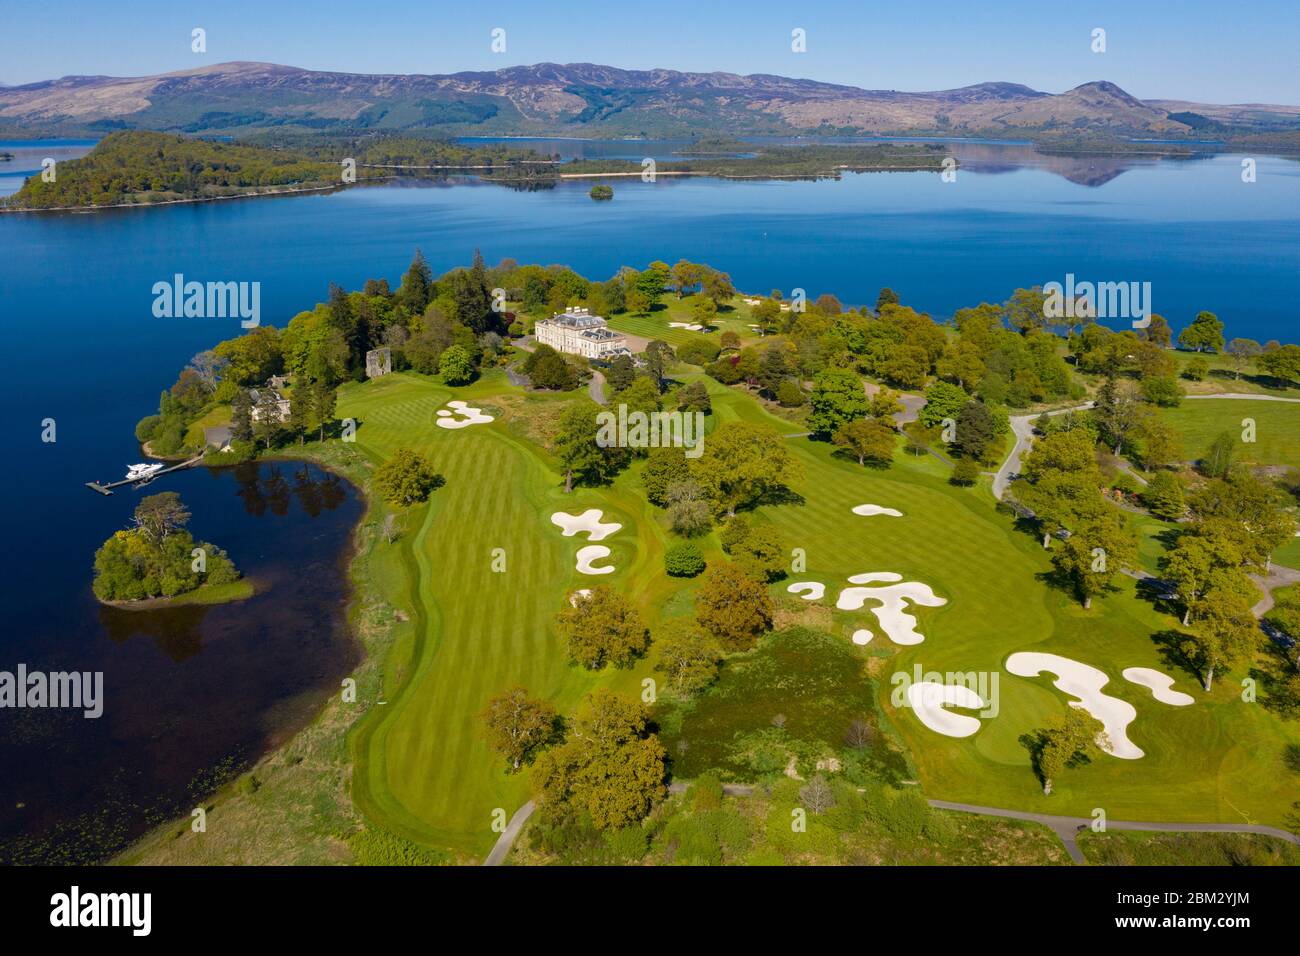 Aerial view of Loch Lomond Golf Club on shores of Loch Lomond, closed  during Covid-19 lockdown, Argyll and Bute, Scotland, UK Stock Photo - Alamy